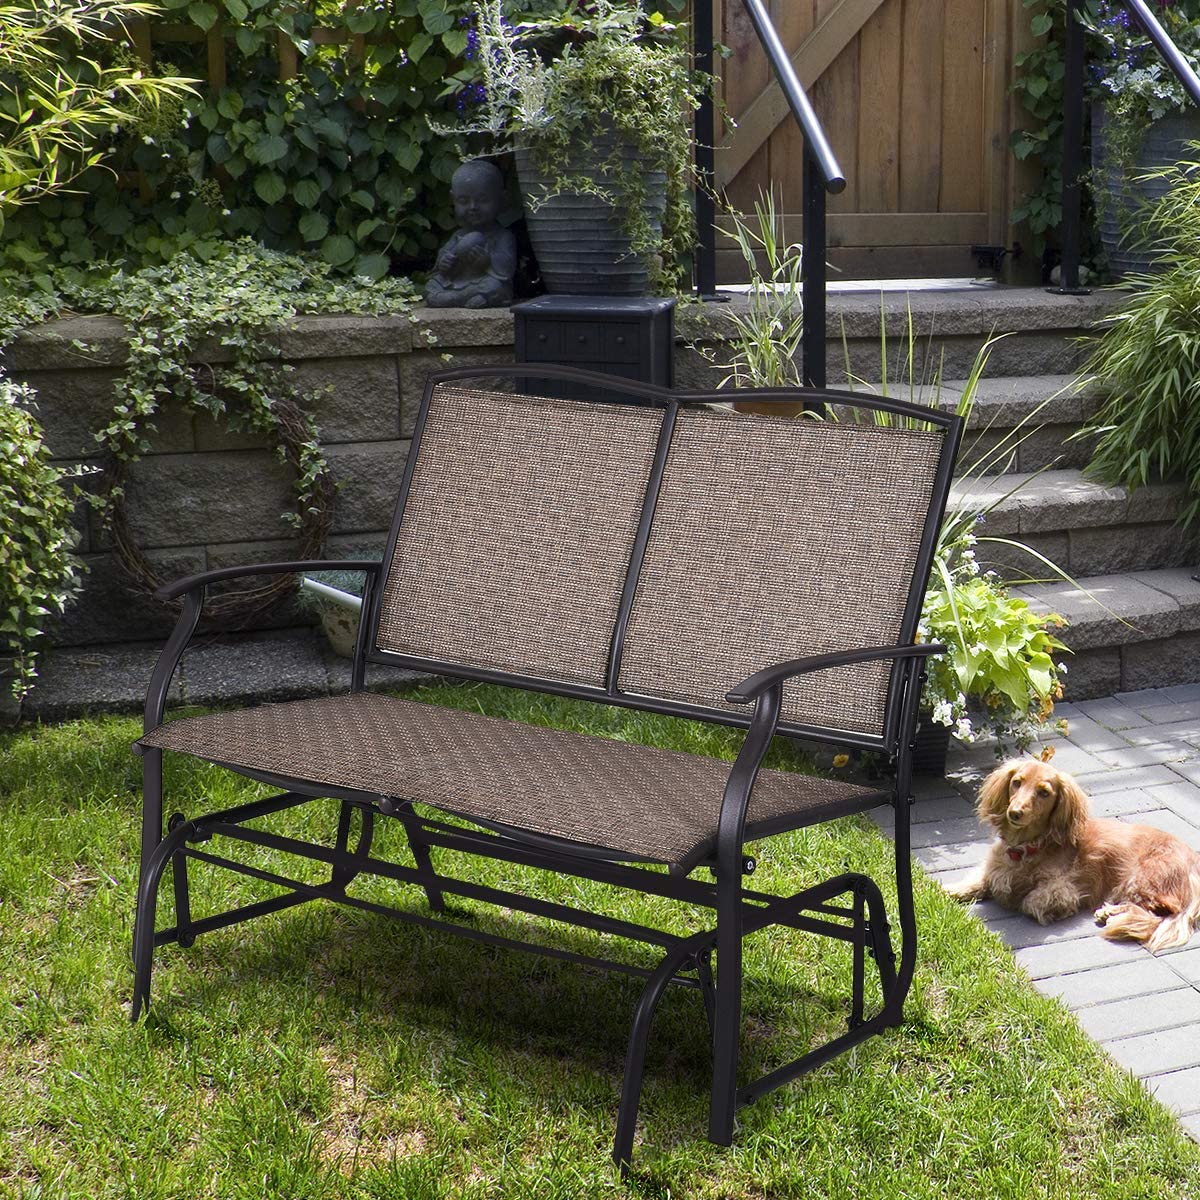 Giantex Patio Glider Stable Steel Frame for Outdoor Backyard (Brown)